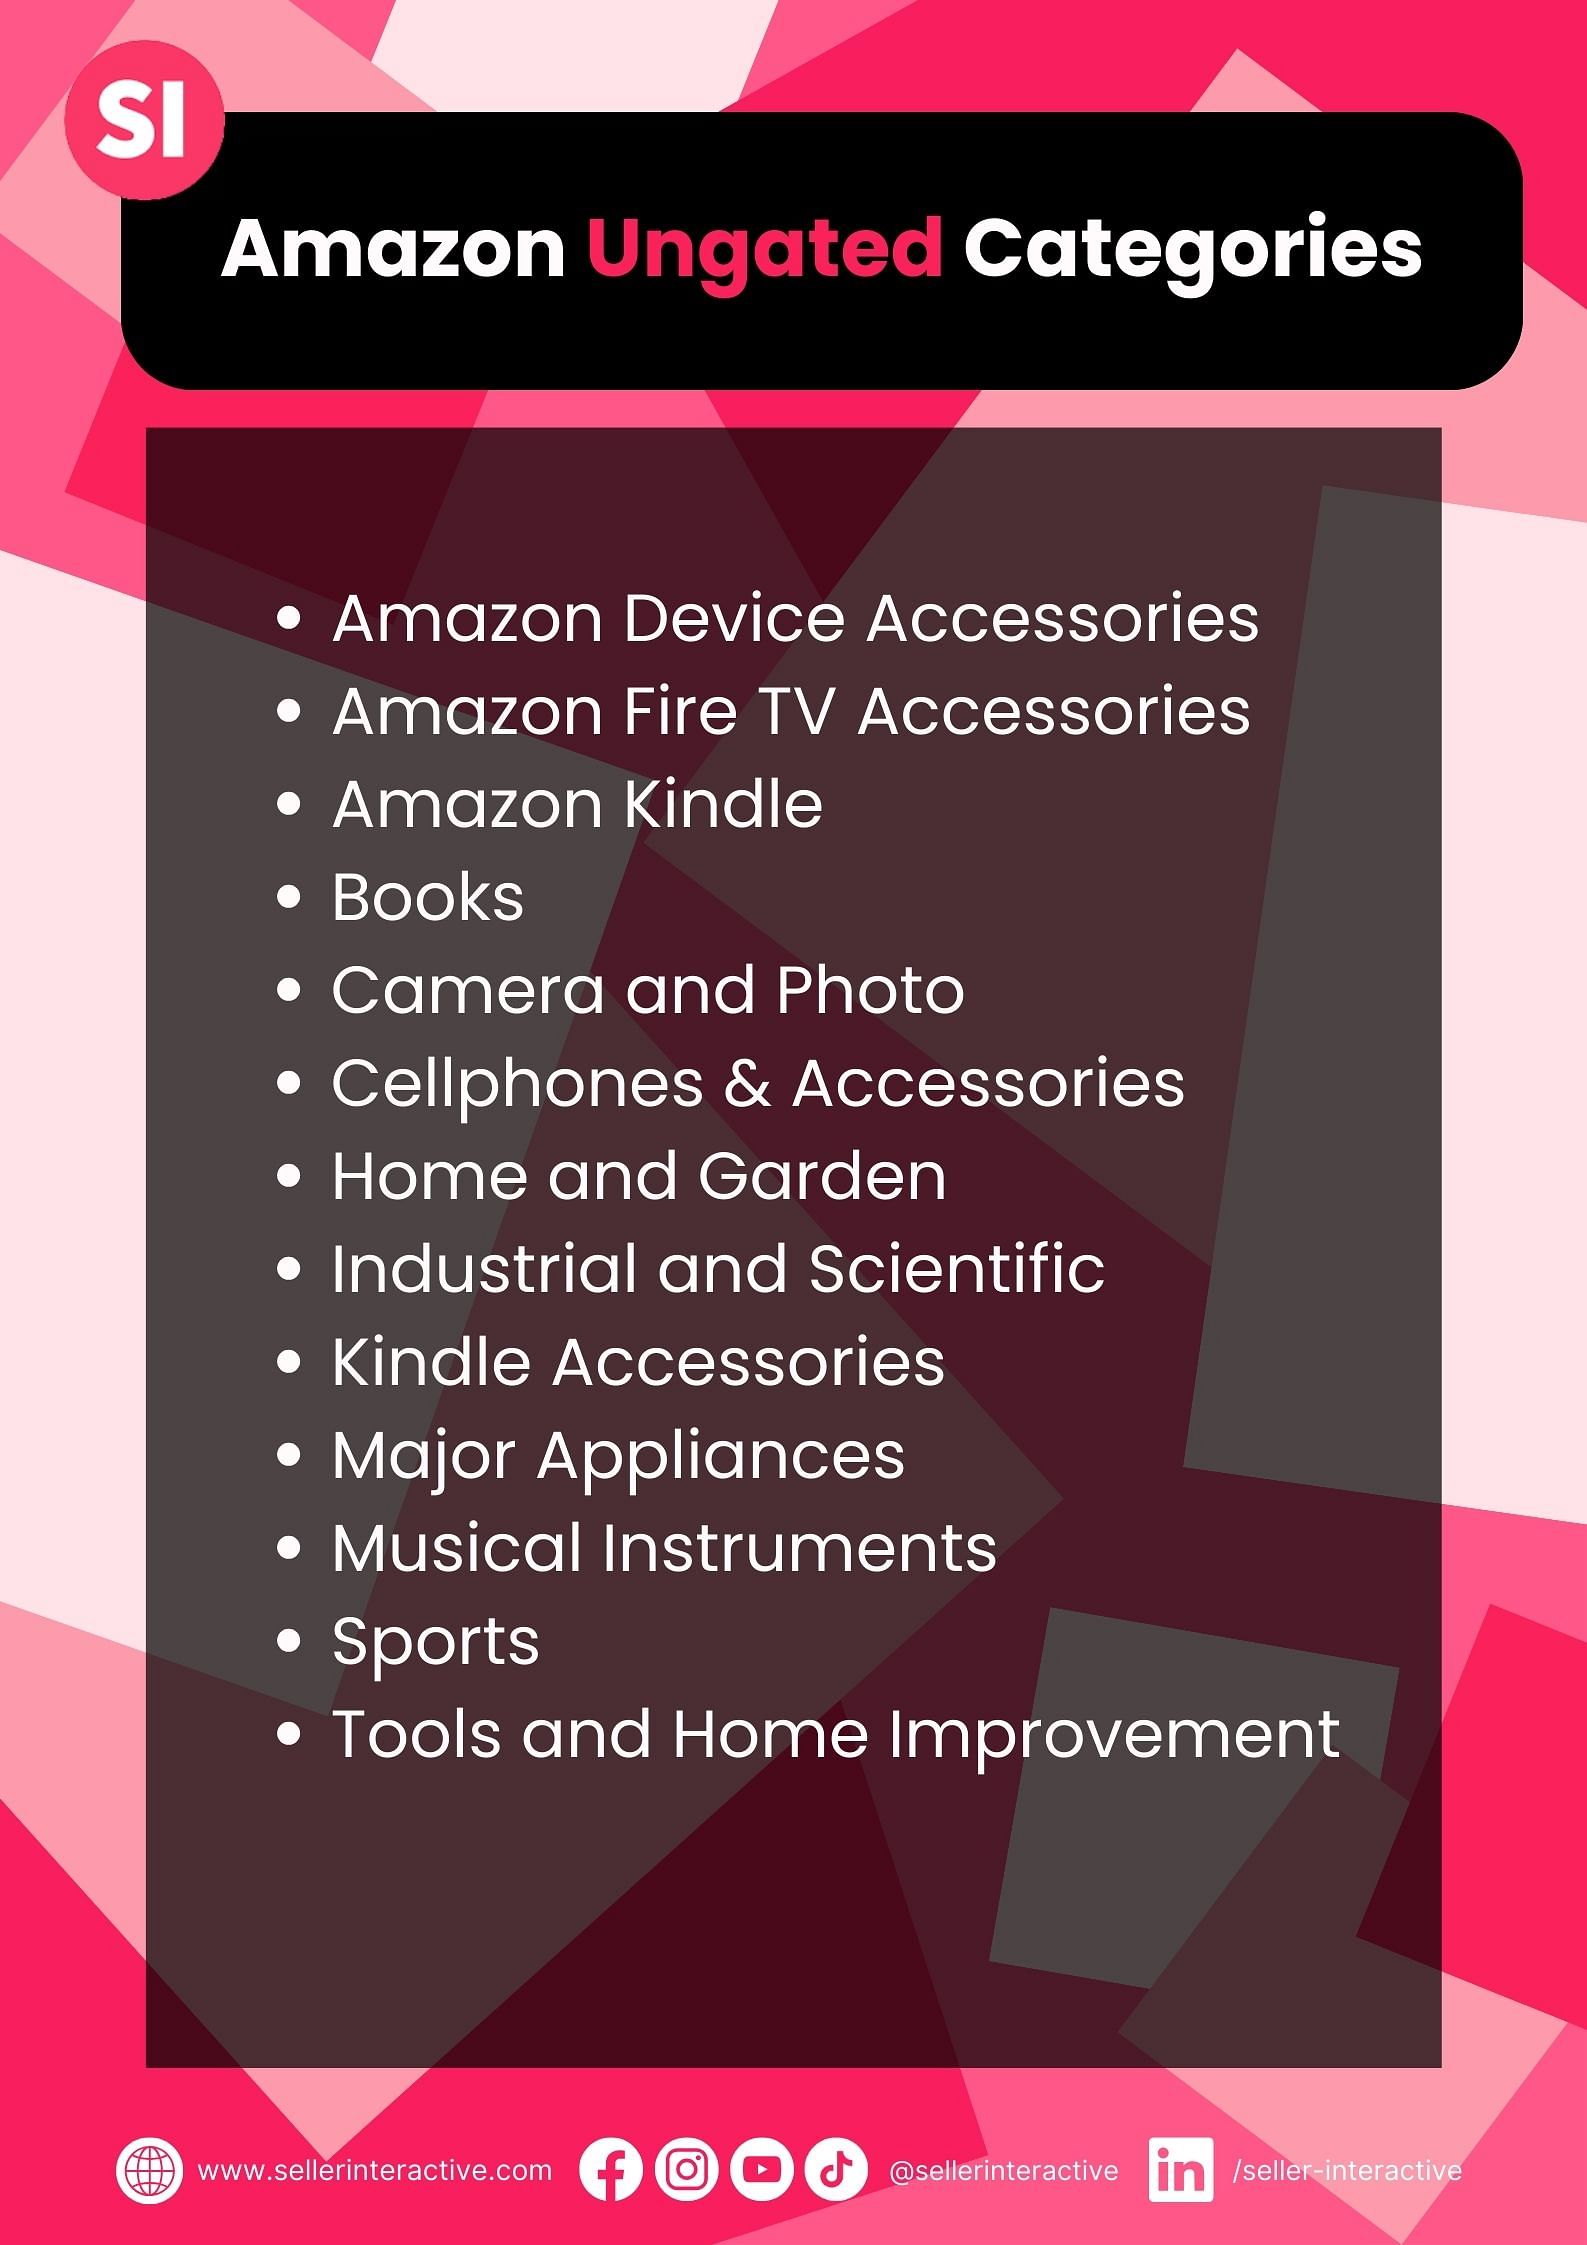 graphic of the ungated categories on Amazon